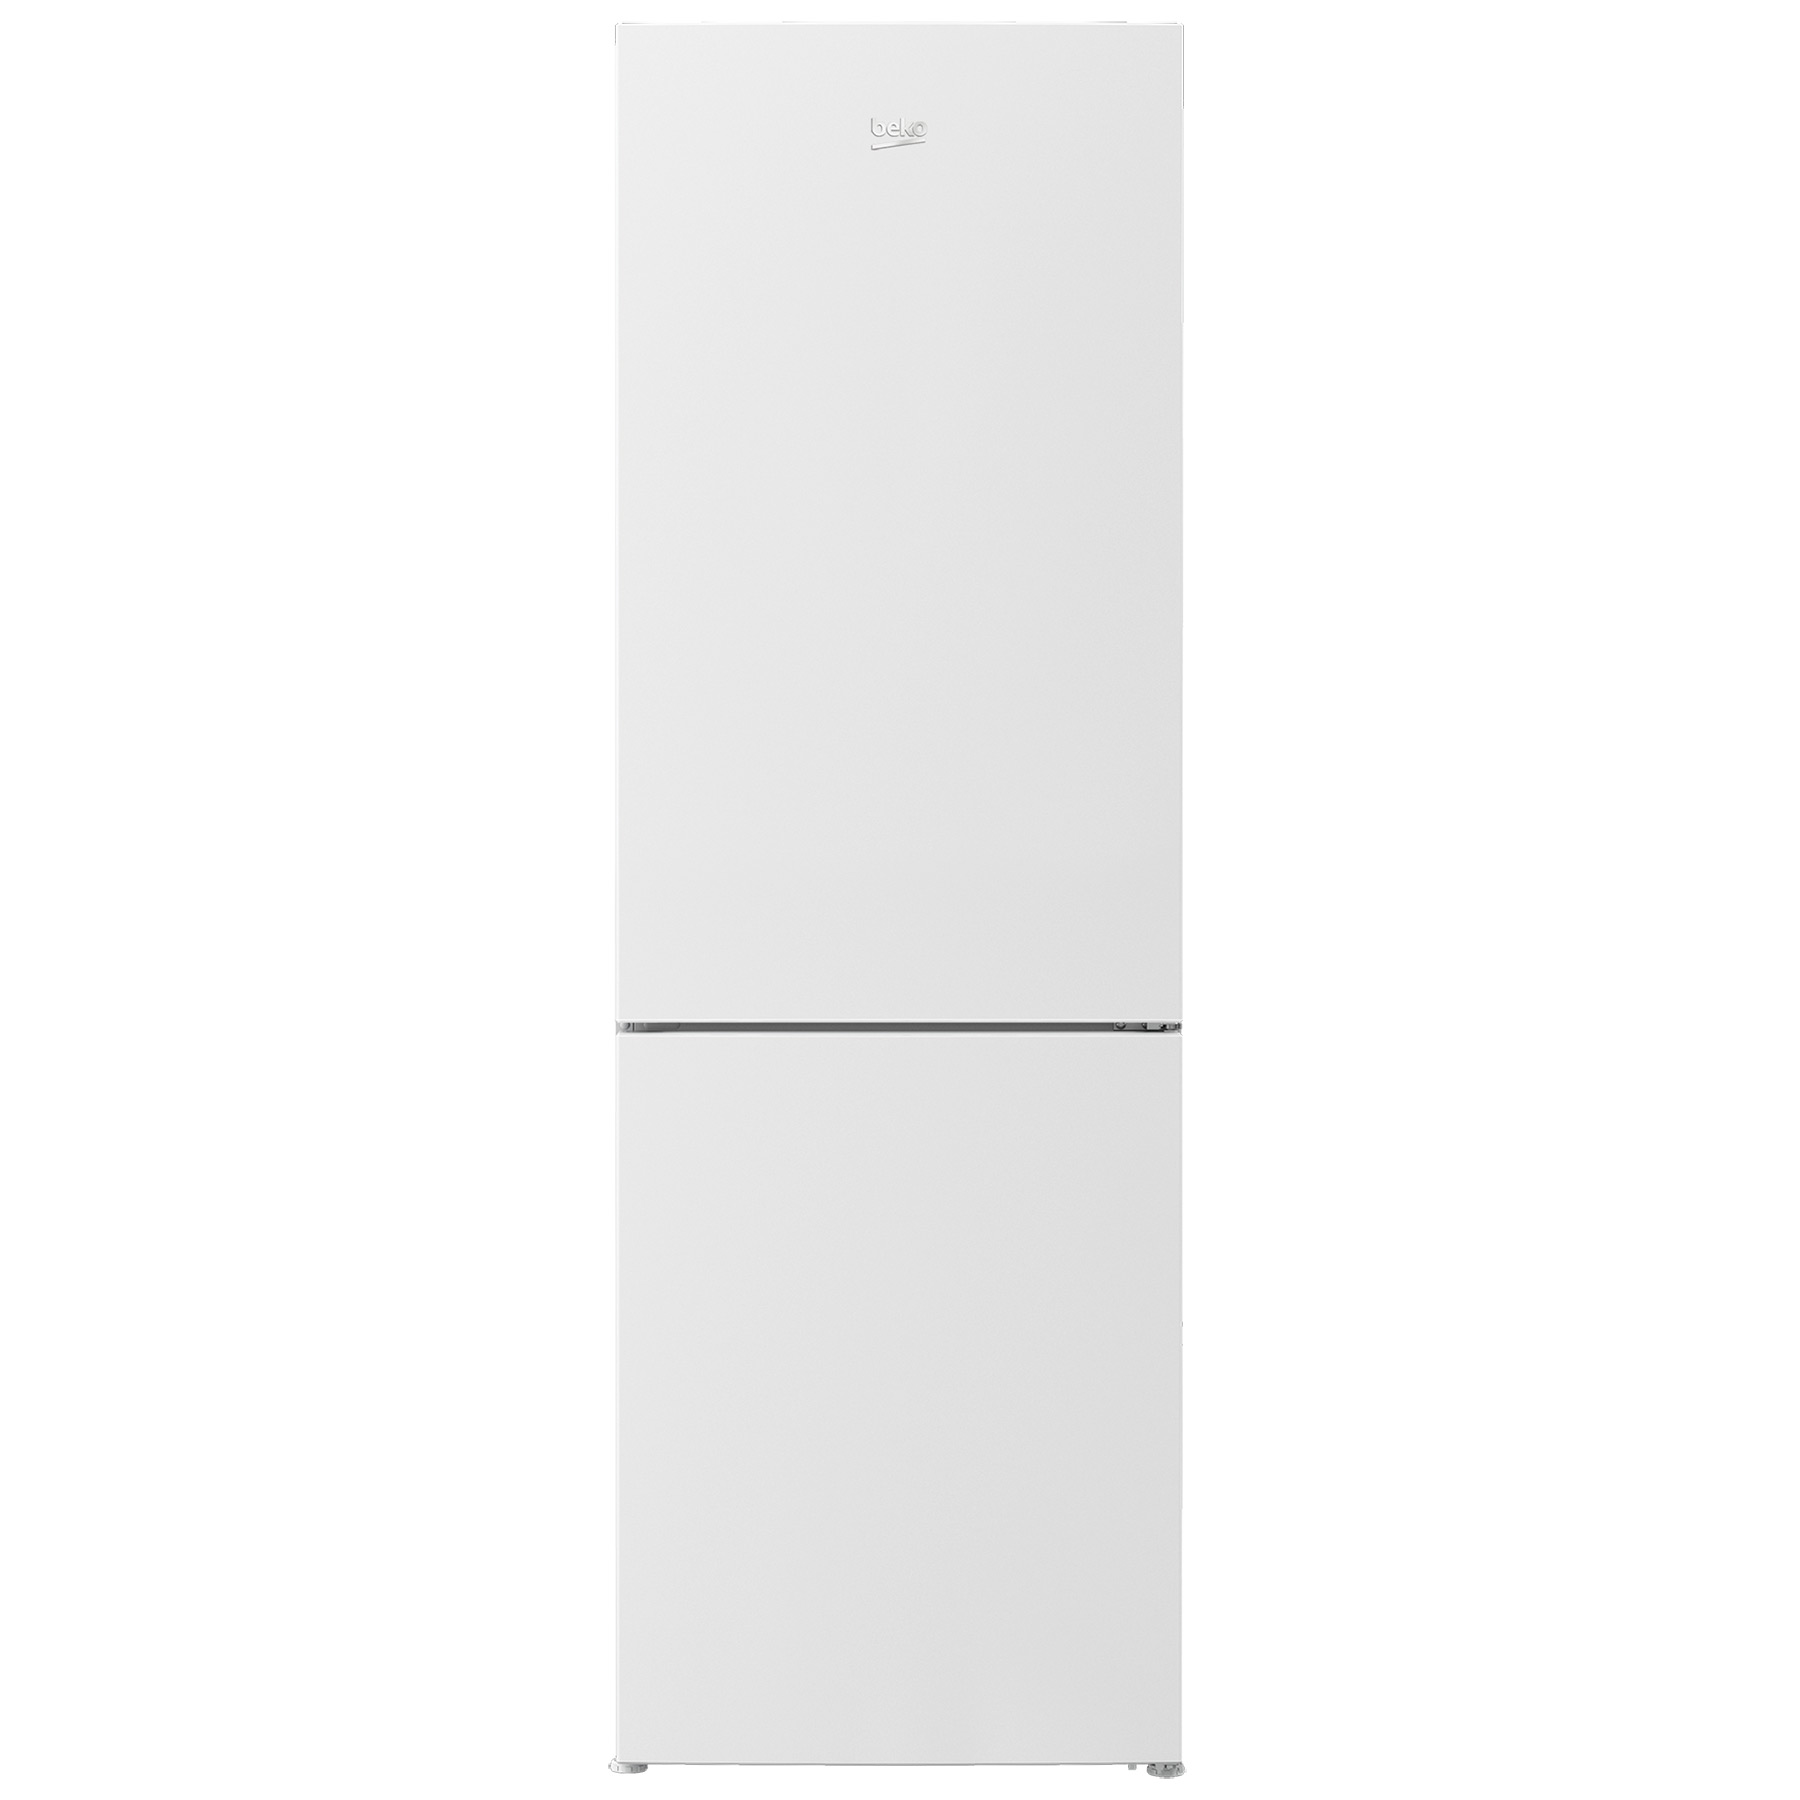 Image of Beko CCFH1685W 60cm Frost Free Fridge Freezer in White 1 85m F Rated